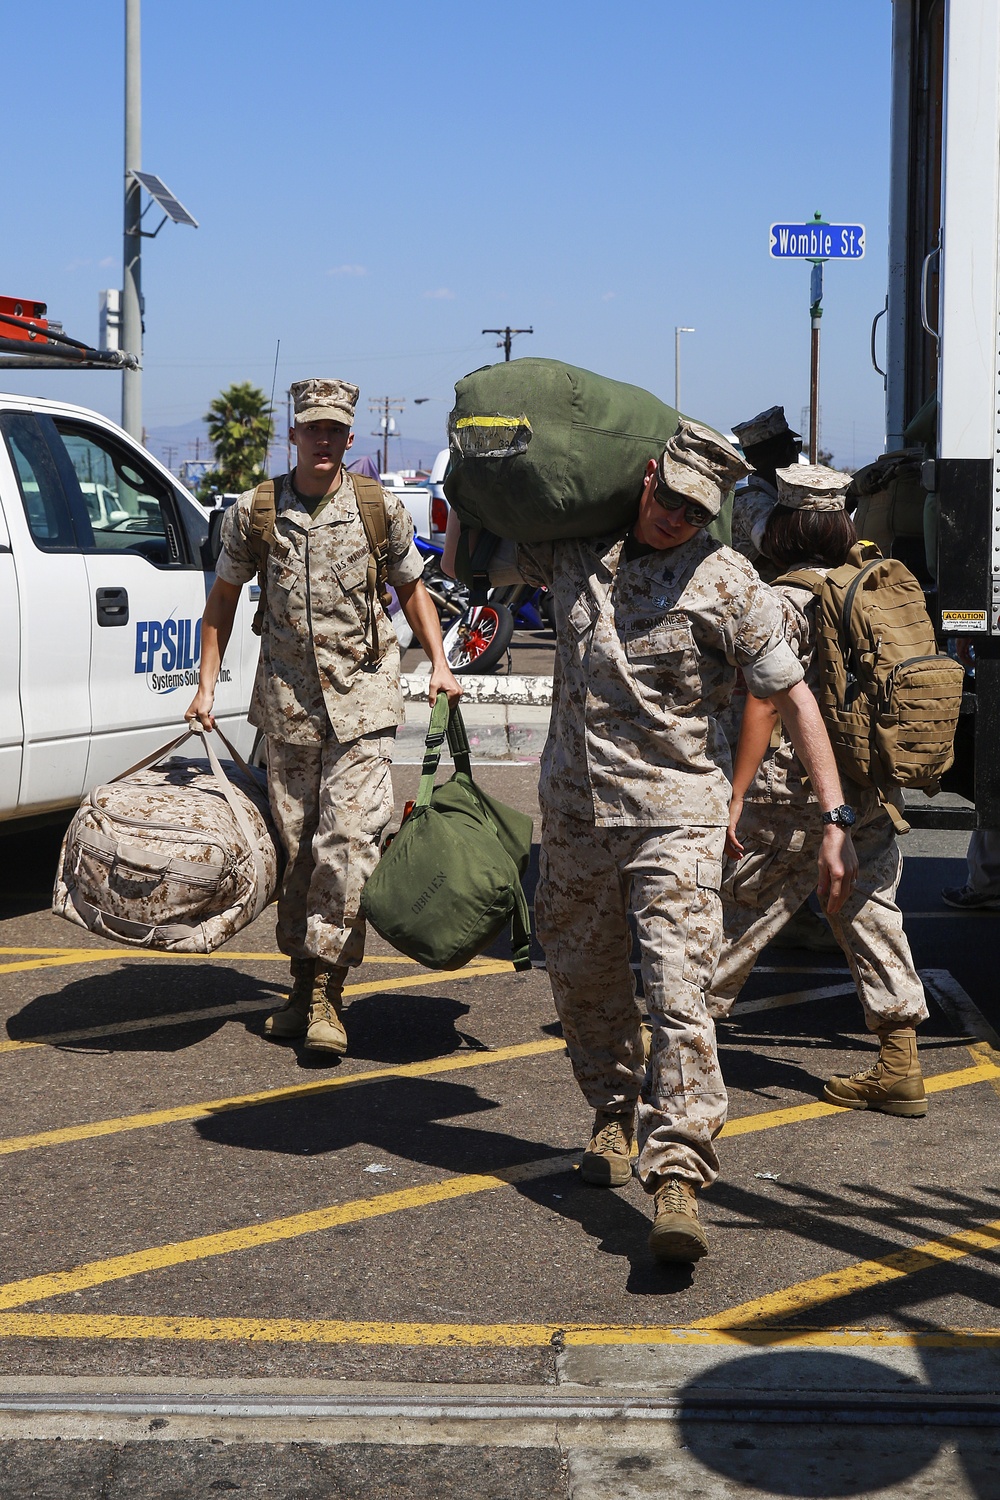 The Marines have landed - First Ever Los Angeles Fleet Week